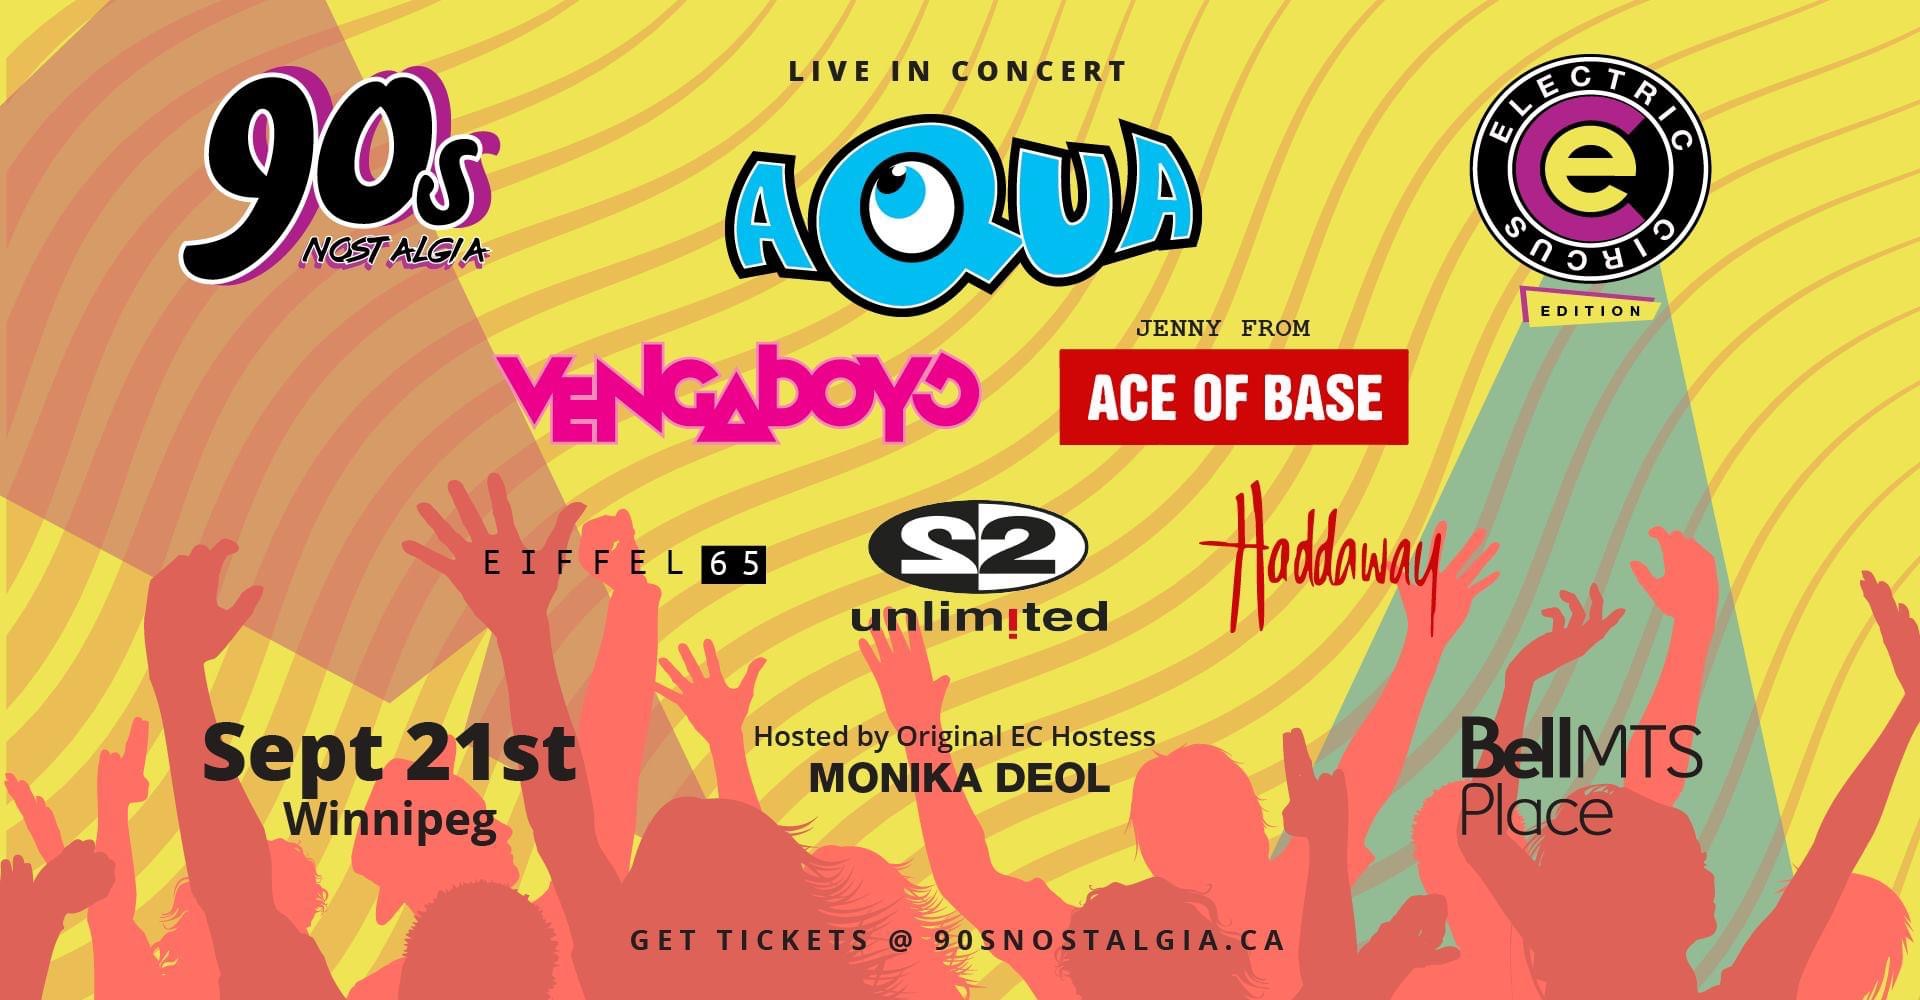 90's Nostalgia Hits Canada This September with Vengaboys, Aqua, and Jenny from Ace of Base